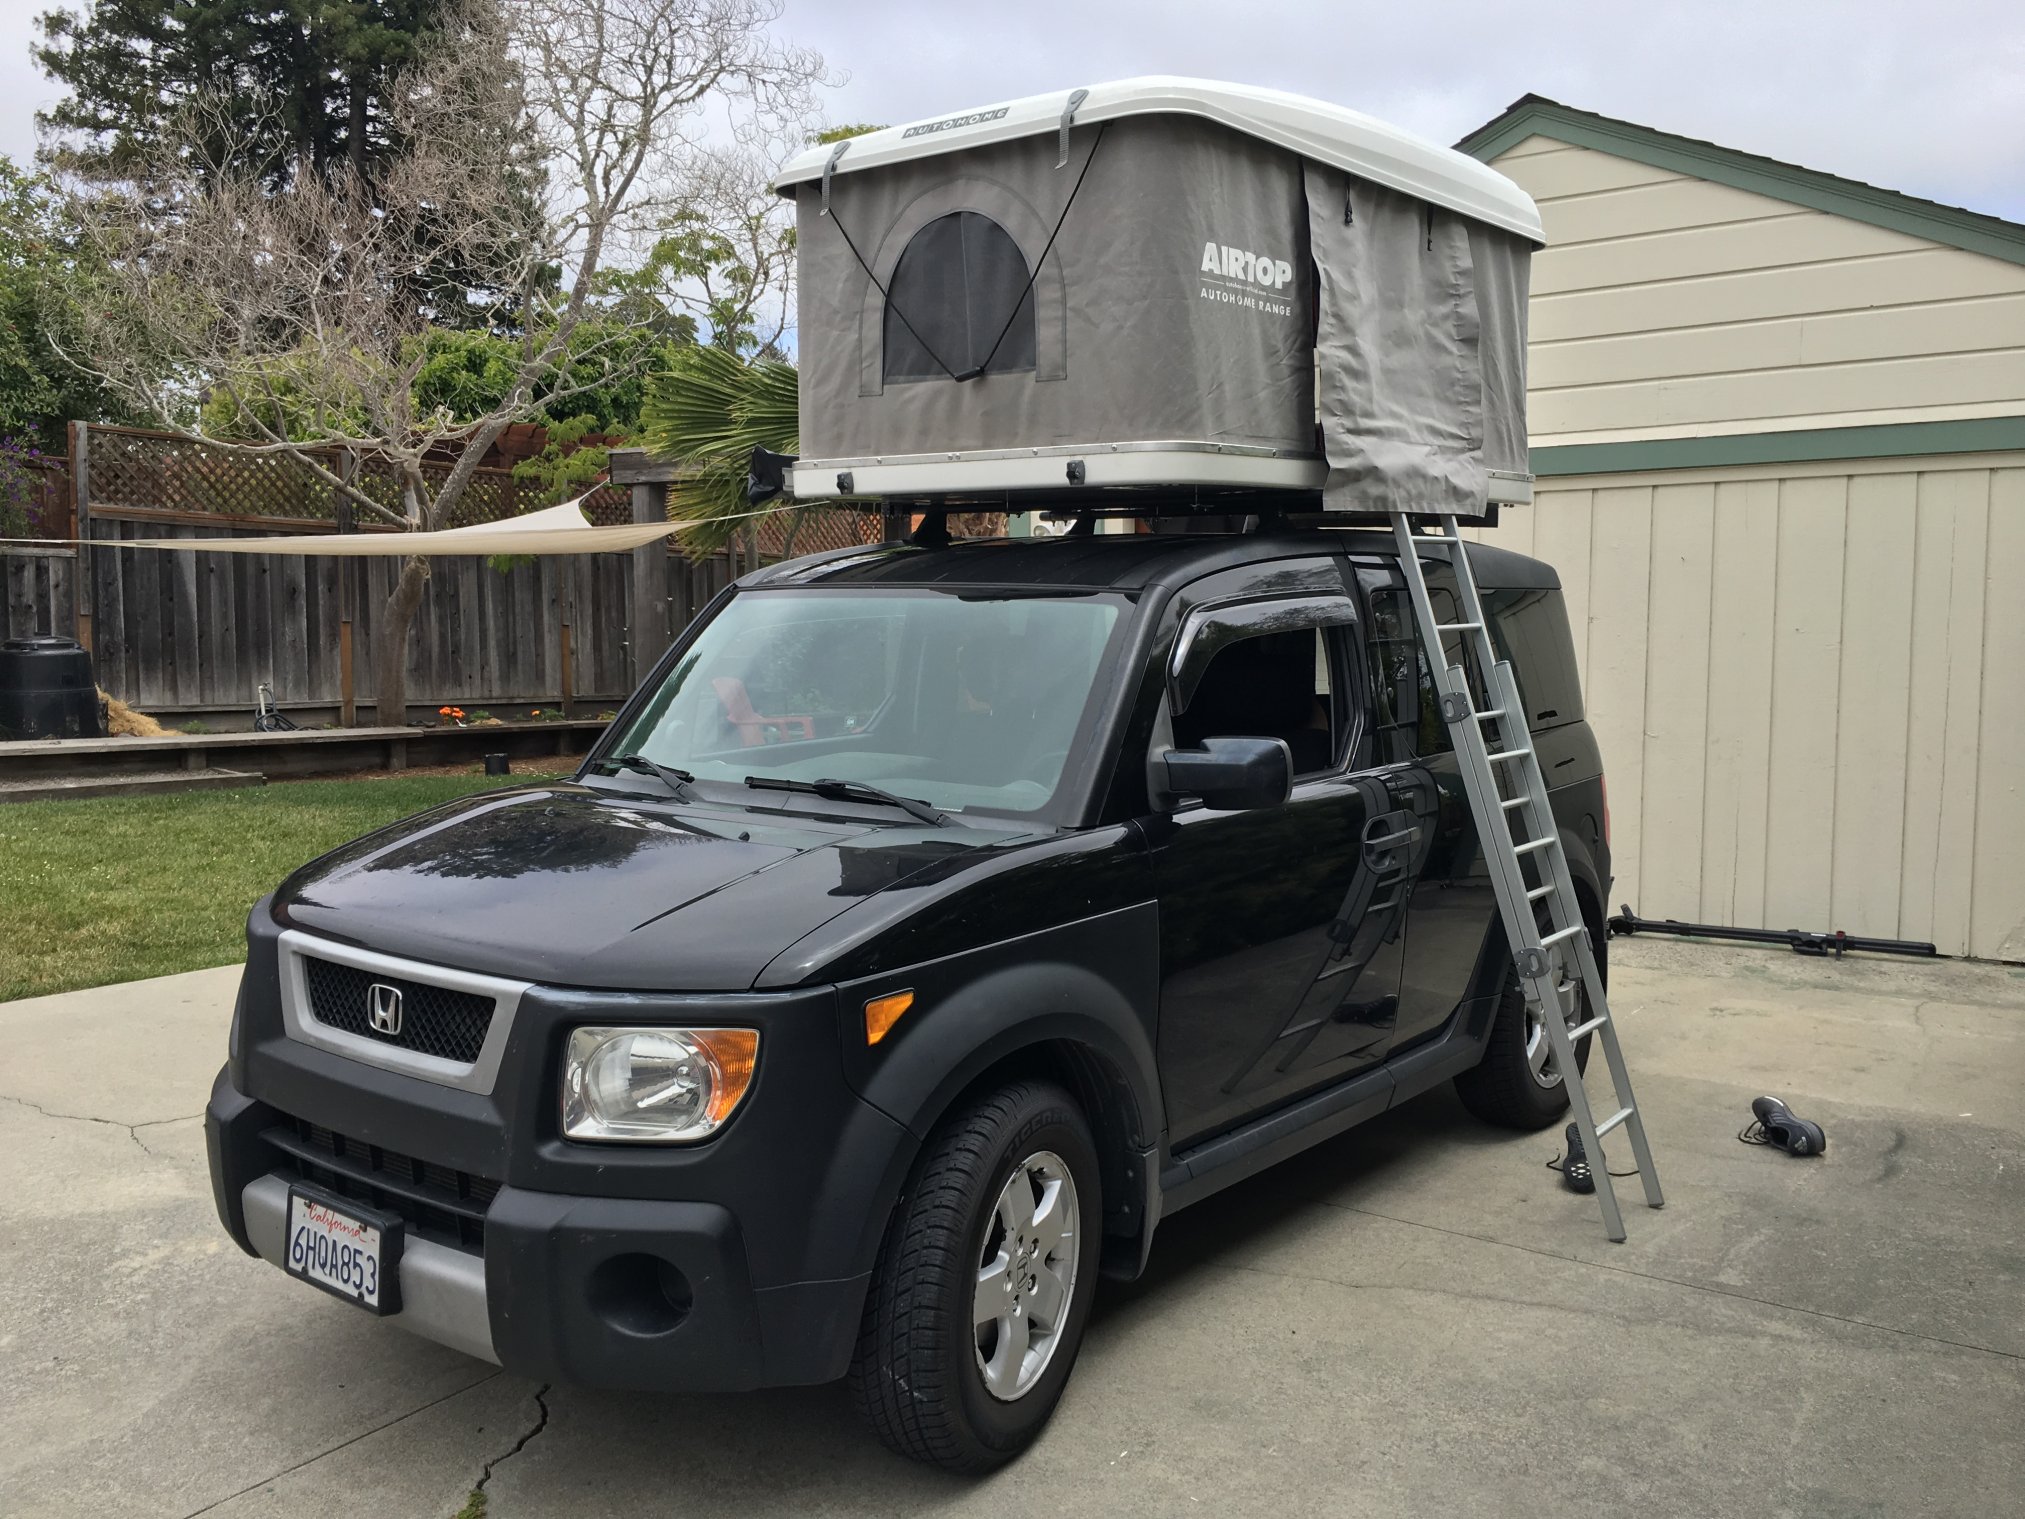 Autohome Airtop Roof Top Tent in Northern California ...